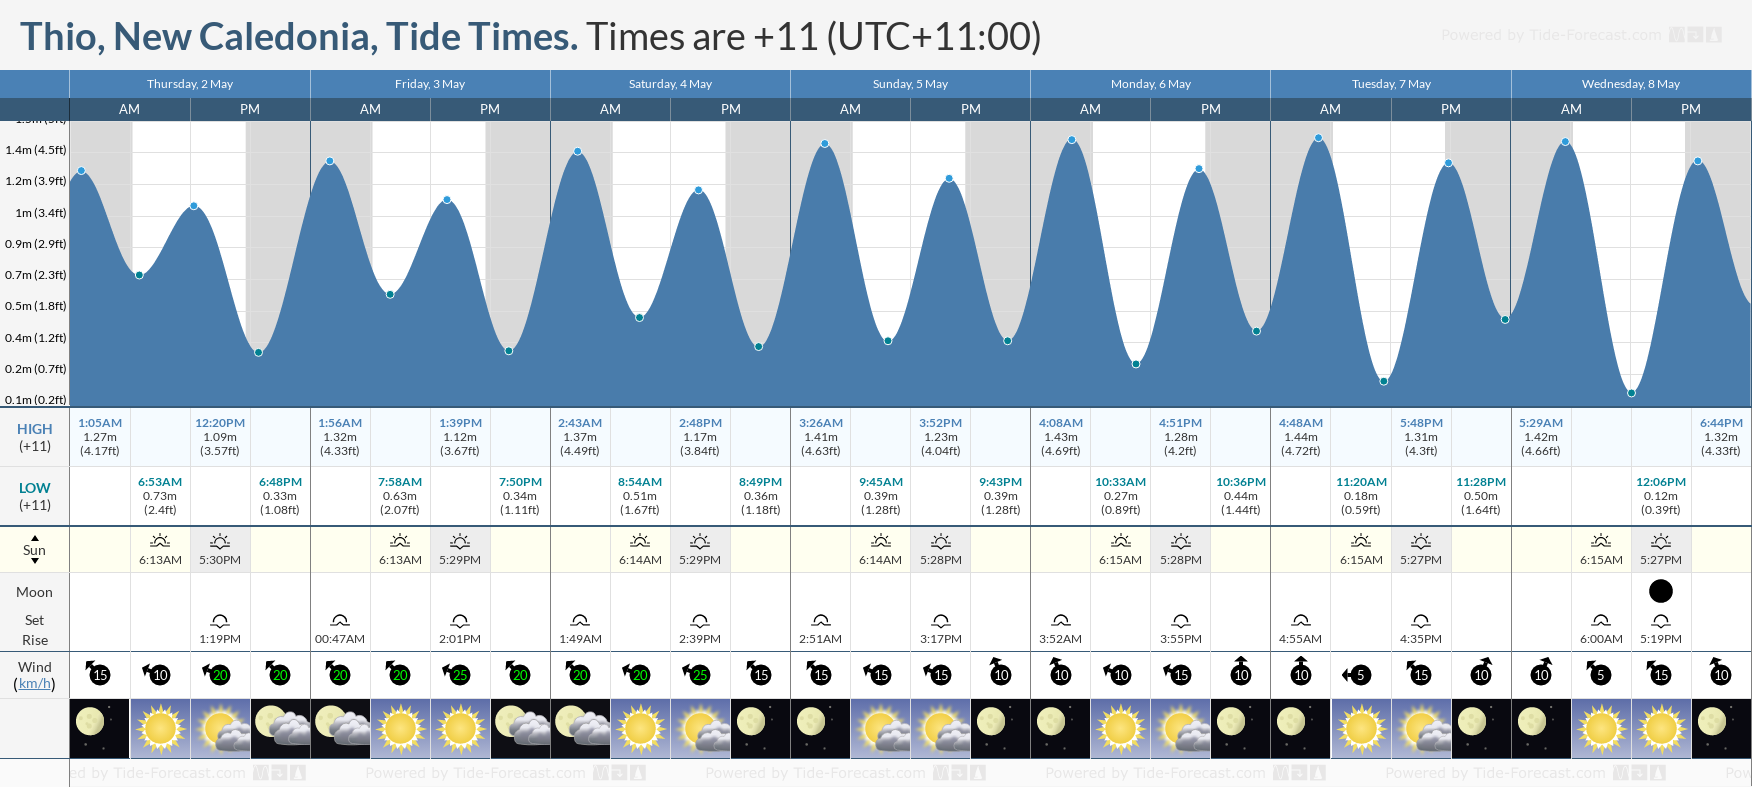 Thio, New Caledonia Tide Chart including high and low tide tide times for the next 7 days